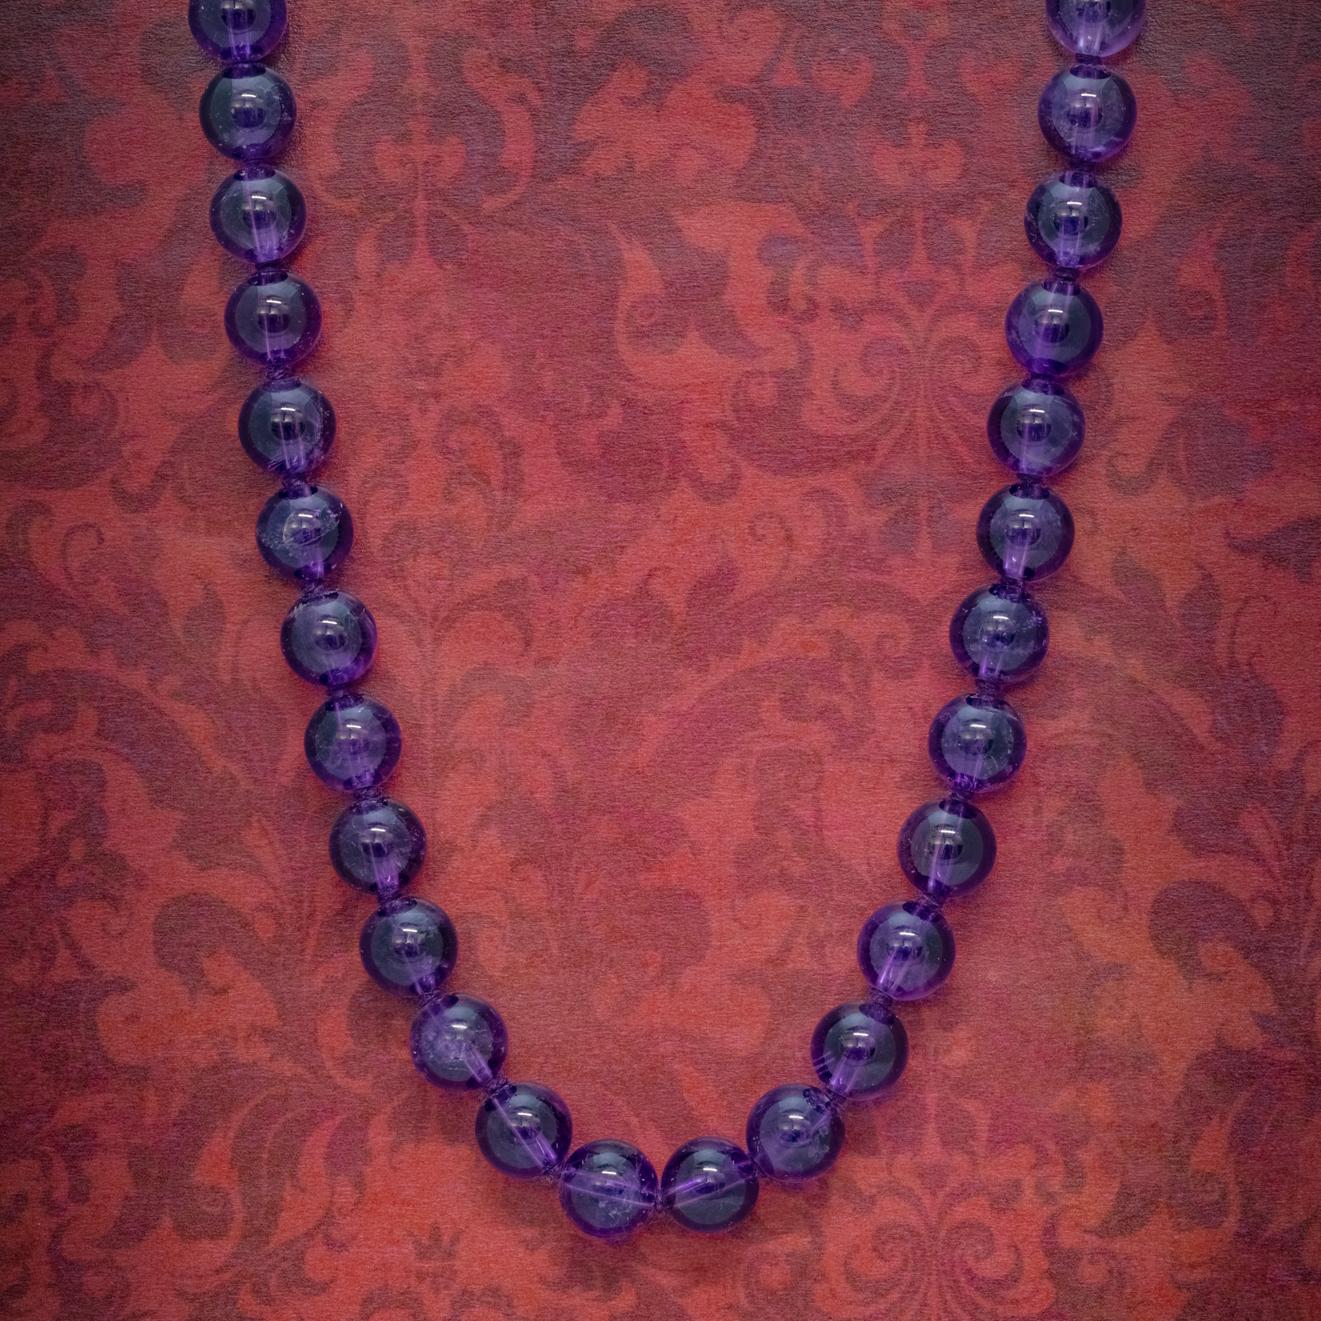 A beautiful Antique Victorian necklace made up of large, polished Amethyst beads which have a lovely vibrant purple hue with the stones raw, natural patterning showing under the surface. 

The beads are knotted in between and held together by a